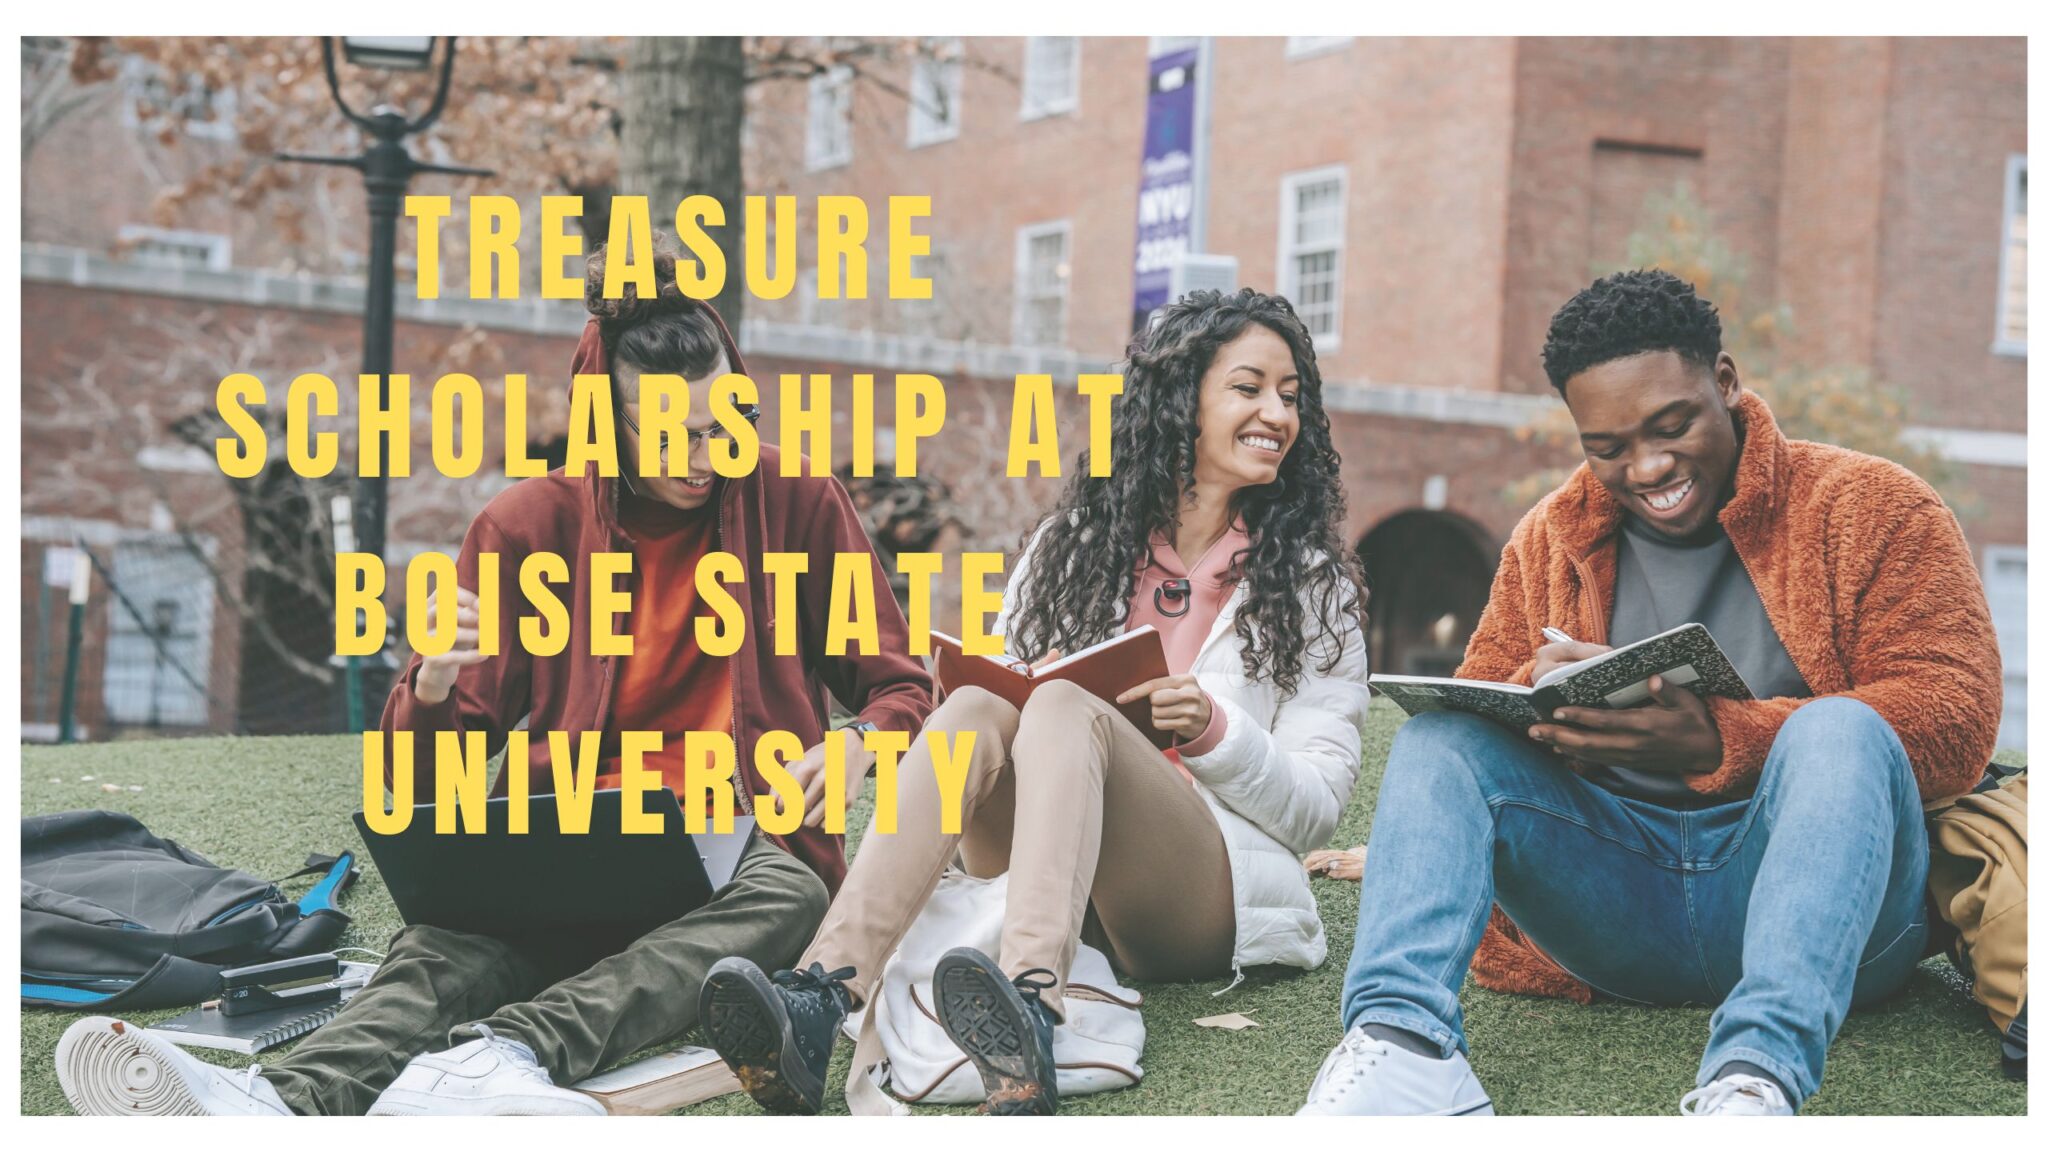 Treasure Scholarship At Boise State University 2022/2023 - Best Way To Apply